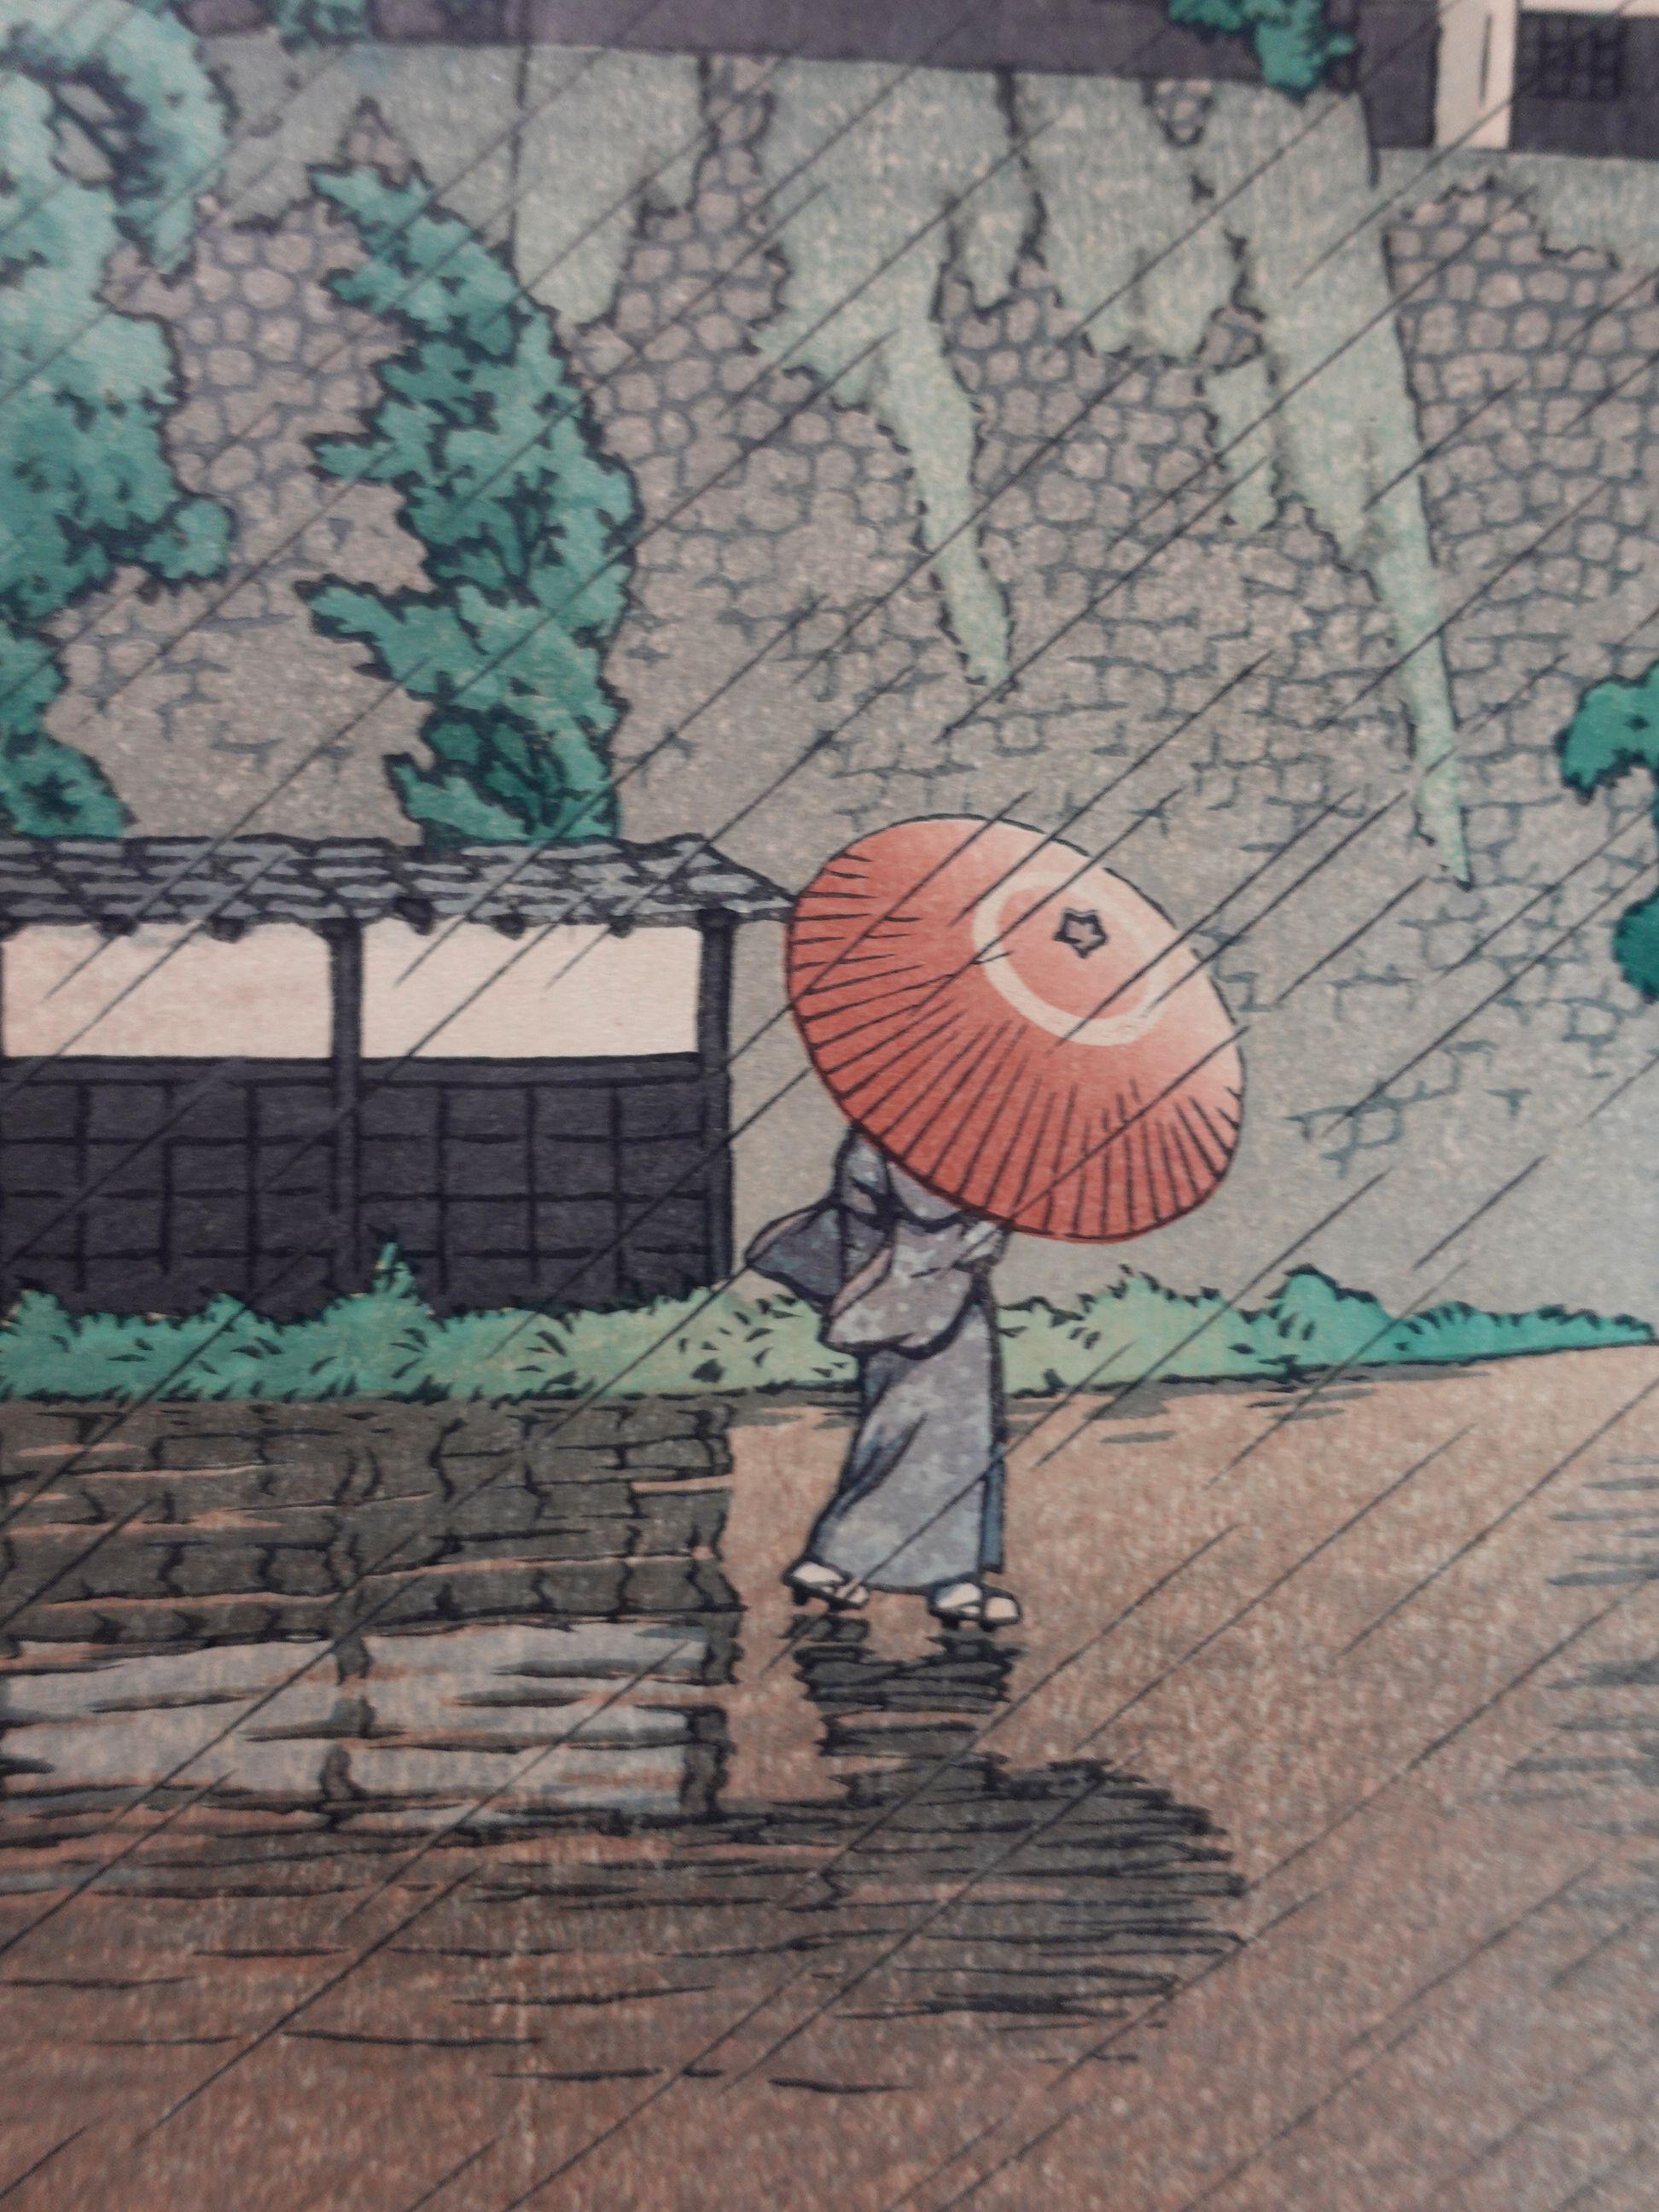 20th Century Japanese Woodblock Print by Kawase Hasui, Published 1948